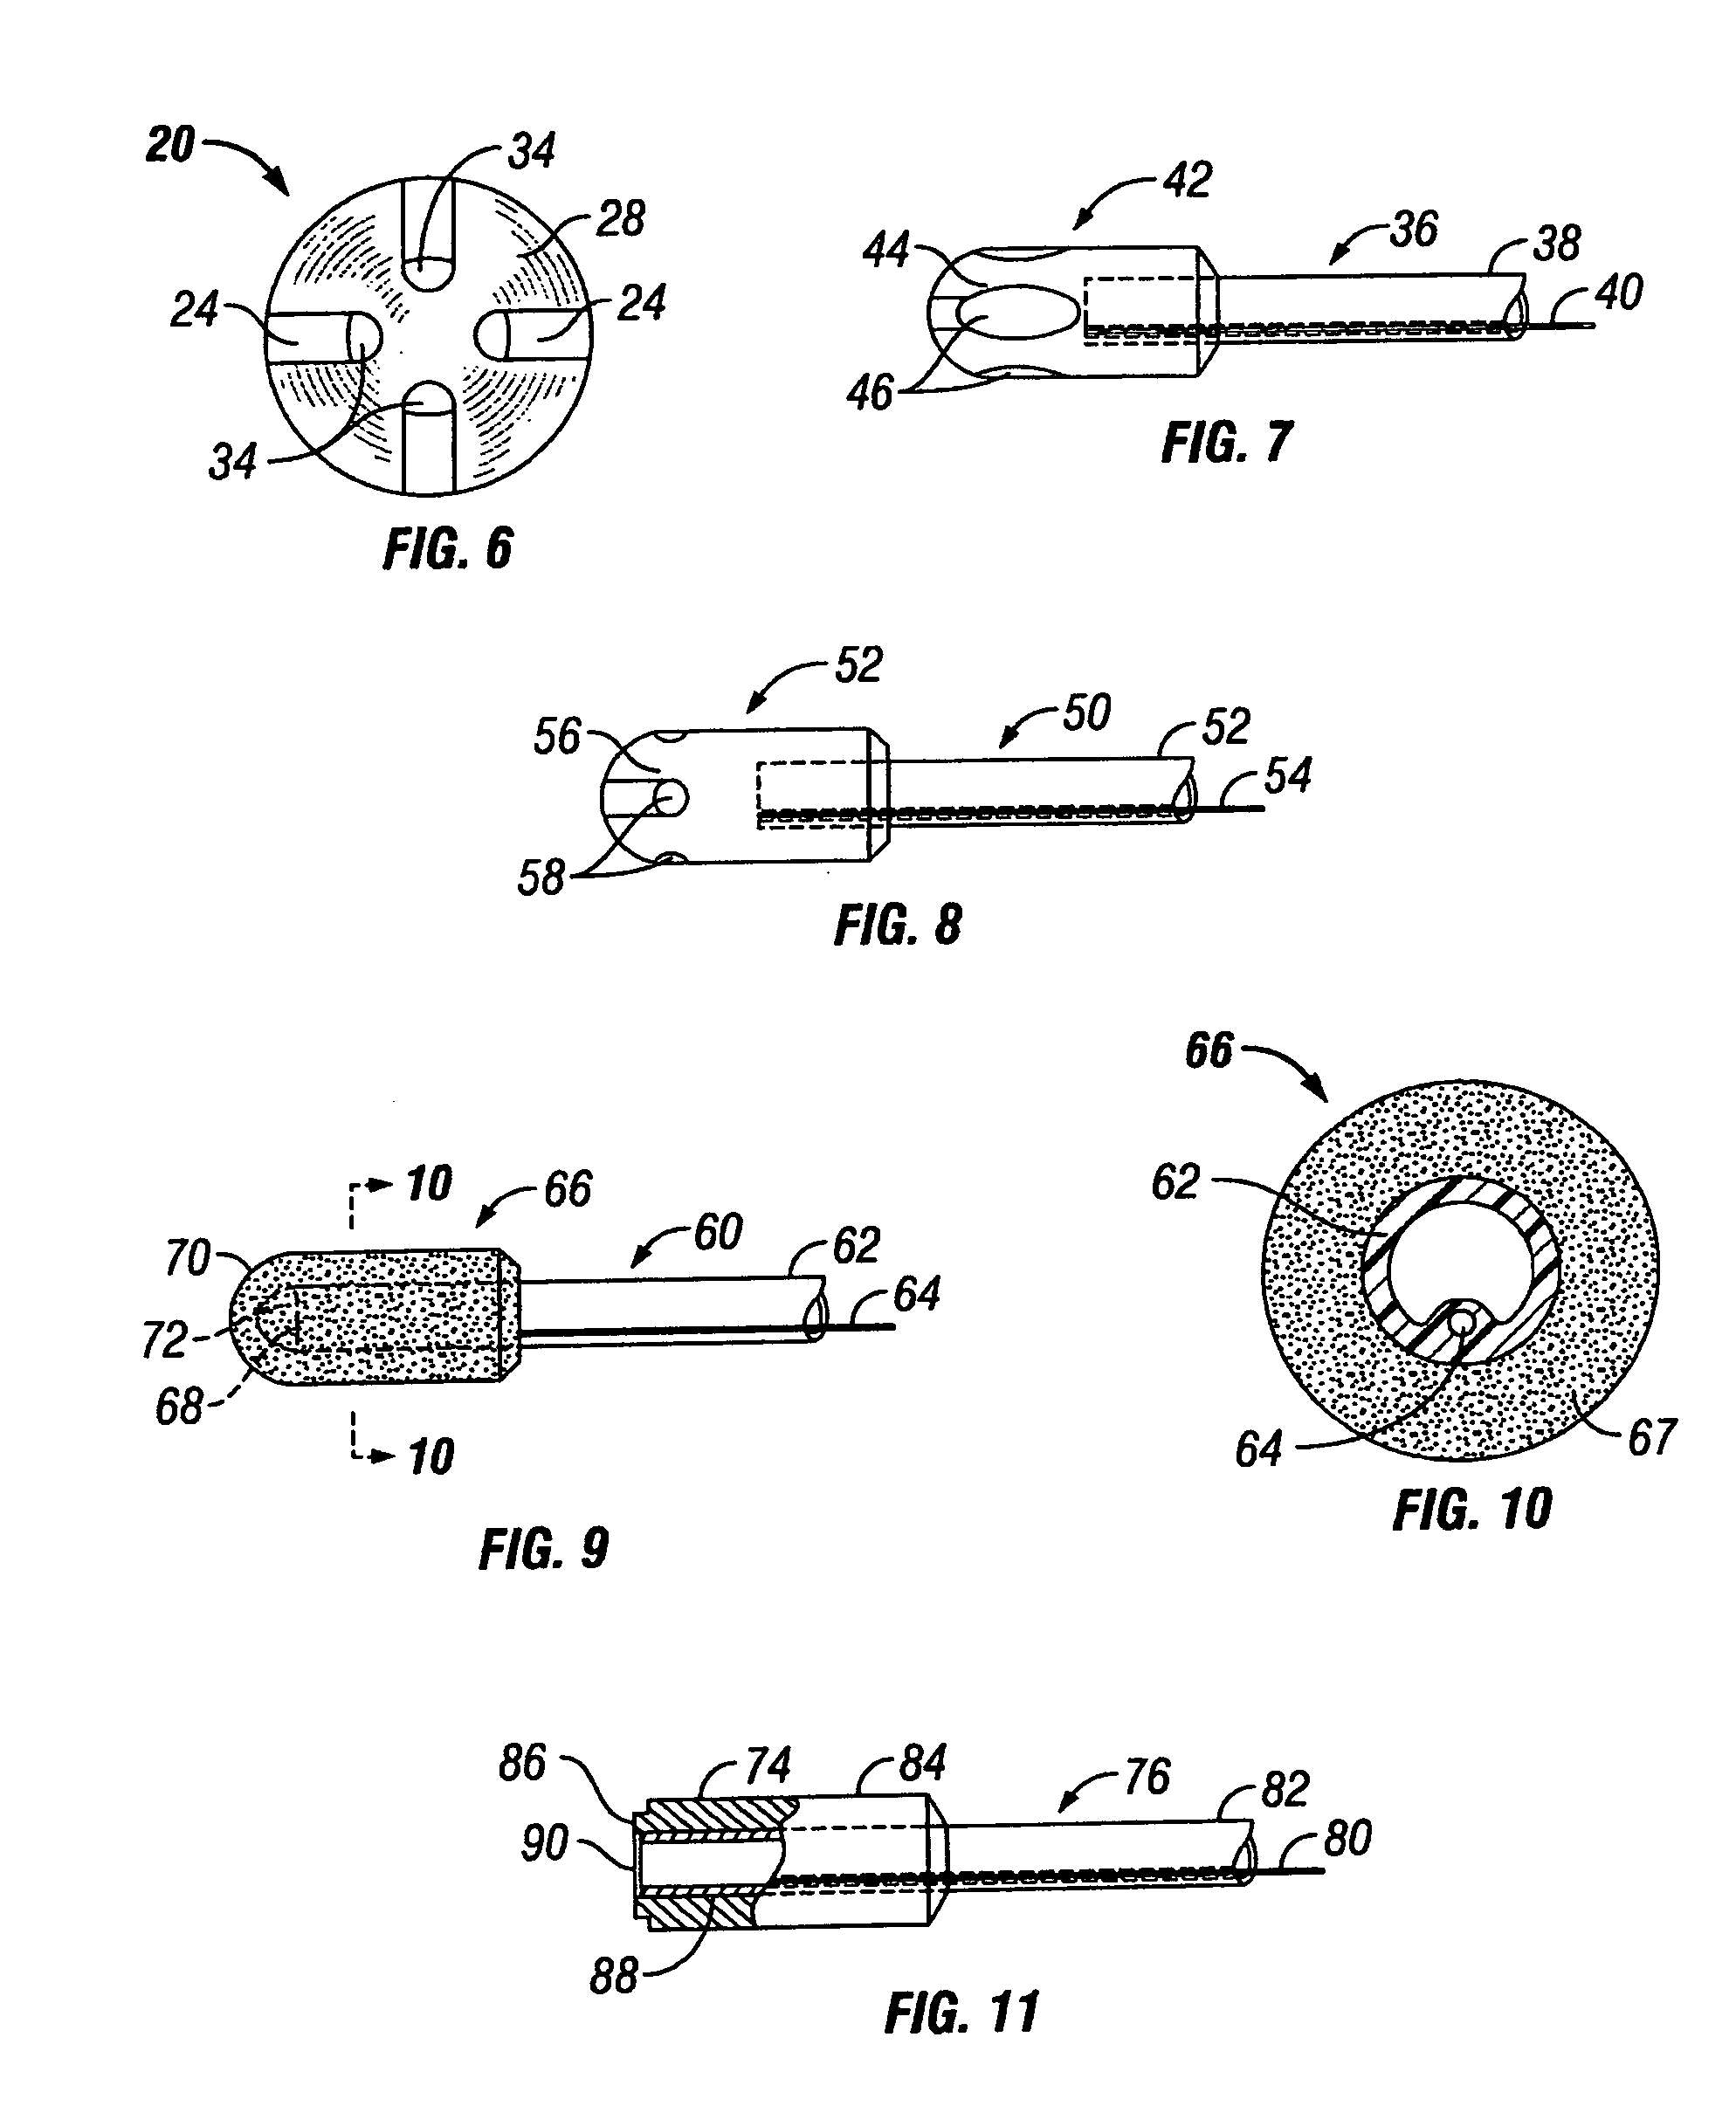 Aspirator having a cushioned and aspiration controlling tip